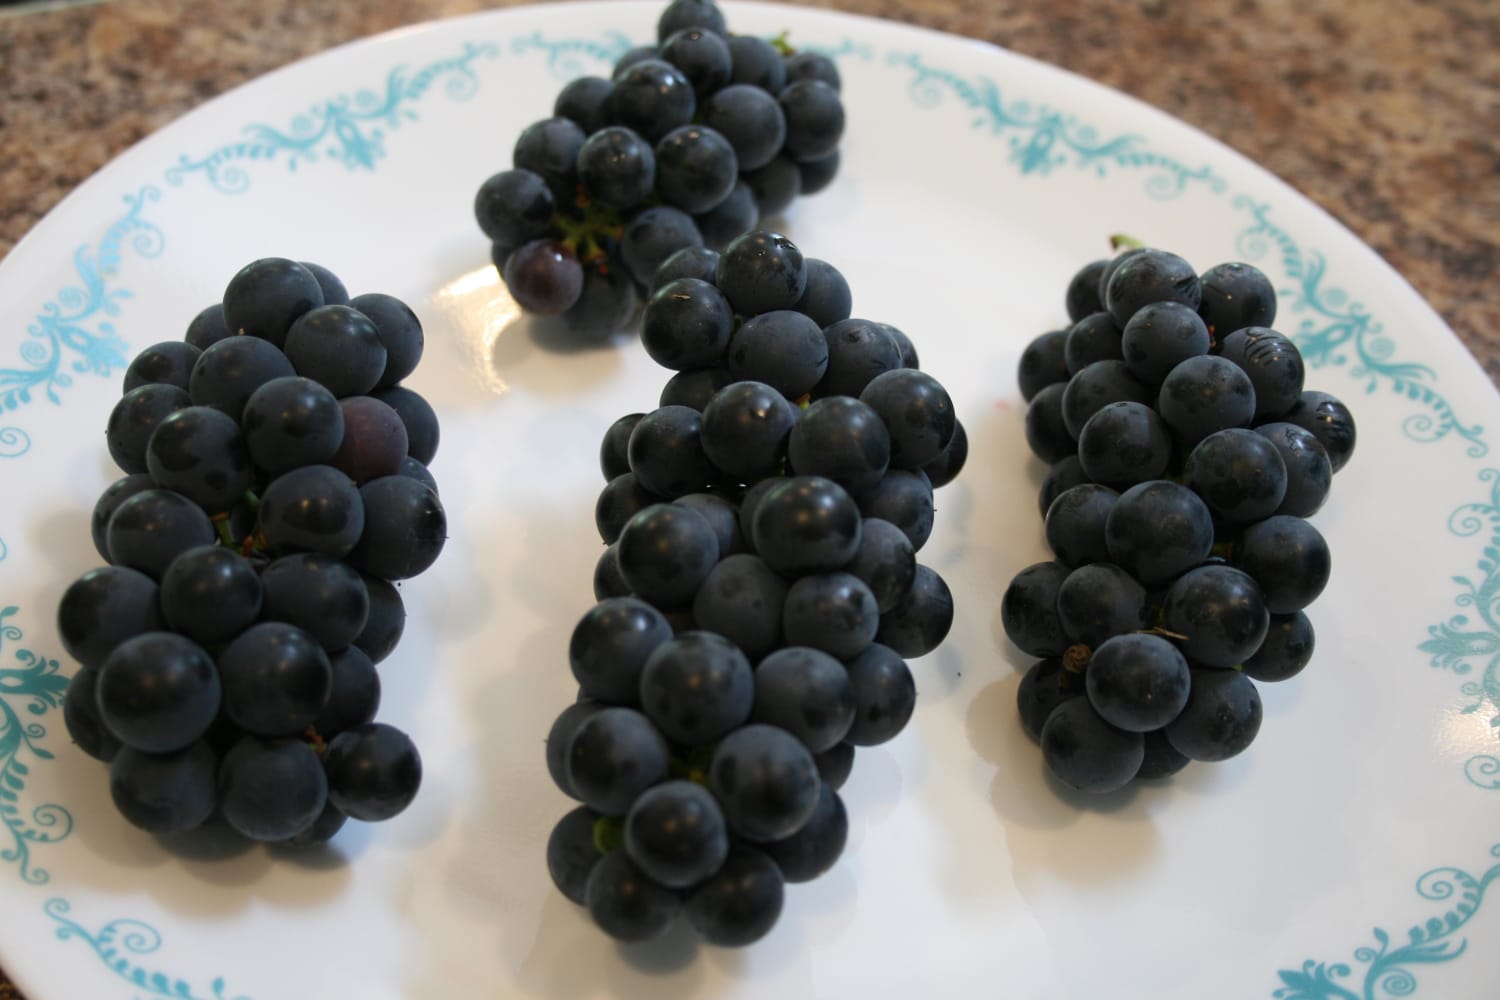 Some of more photogenic bunches from our grape harvest. The kitchen is going to soon smell like grape jelly!